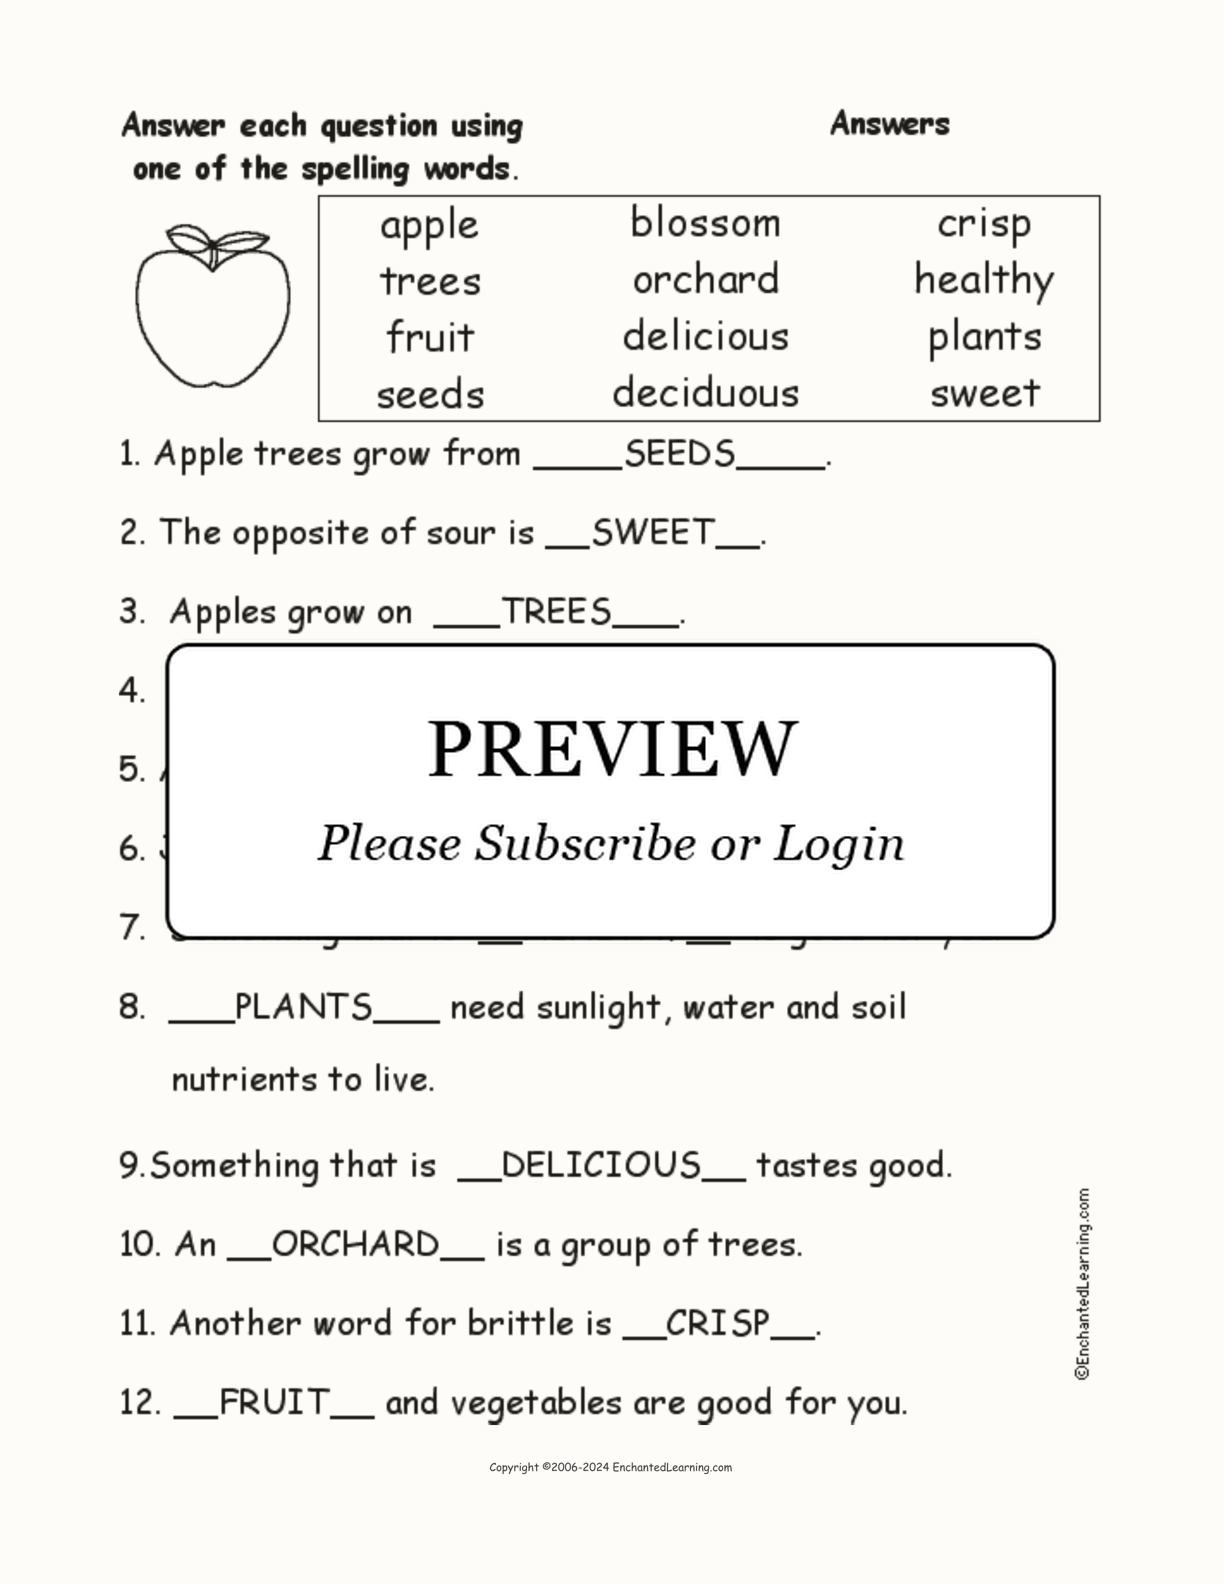 Apple Spelling Word Questions interactive worksheet page 2